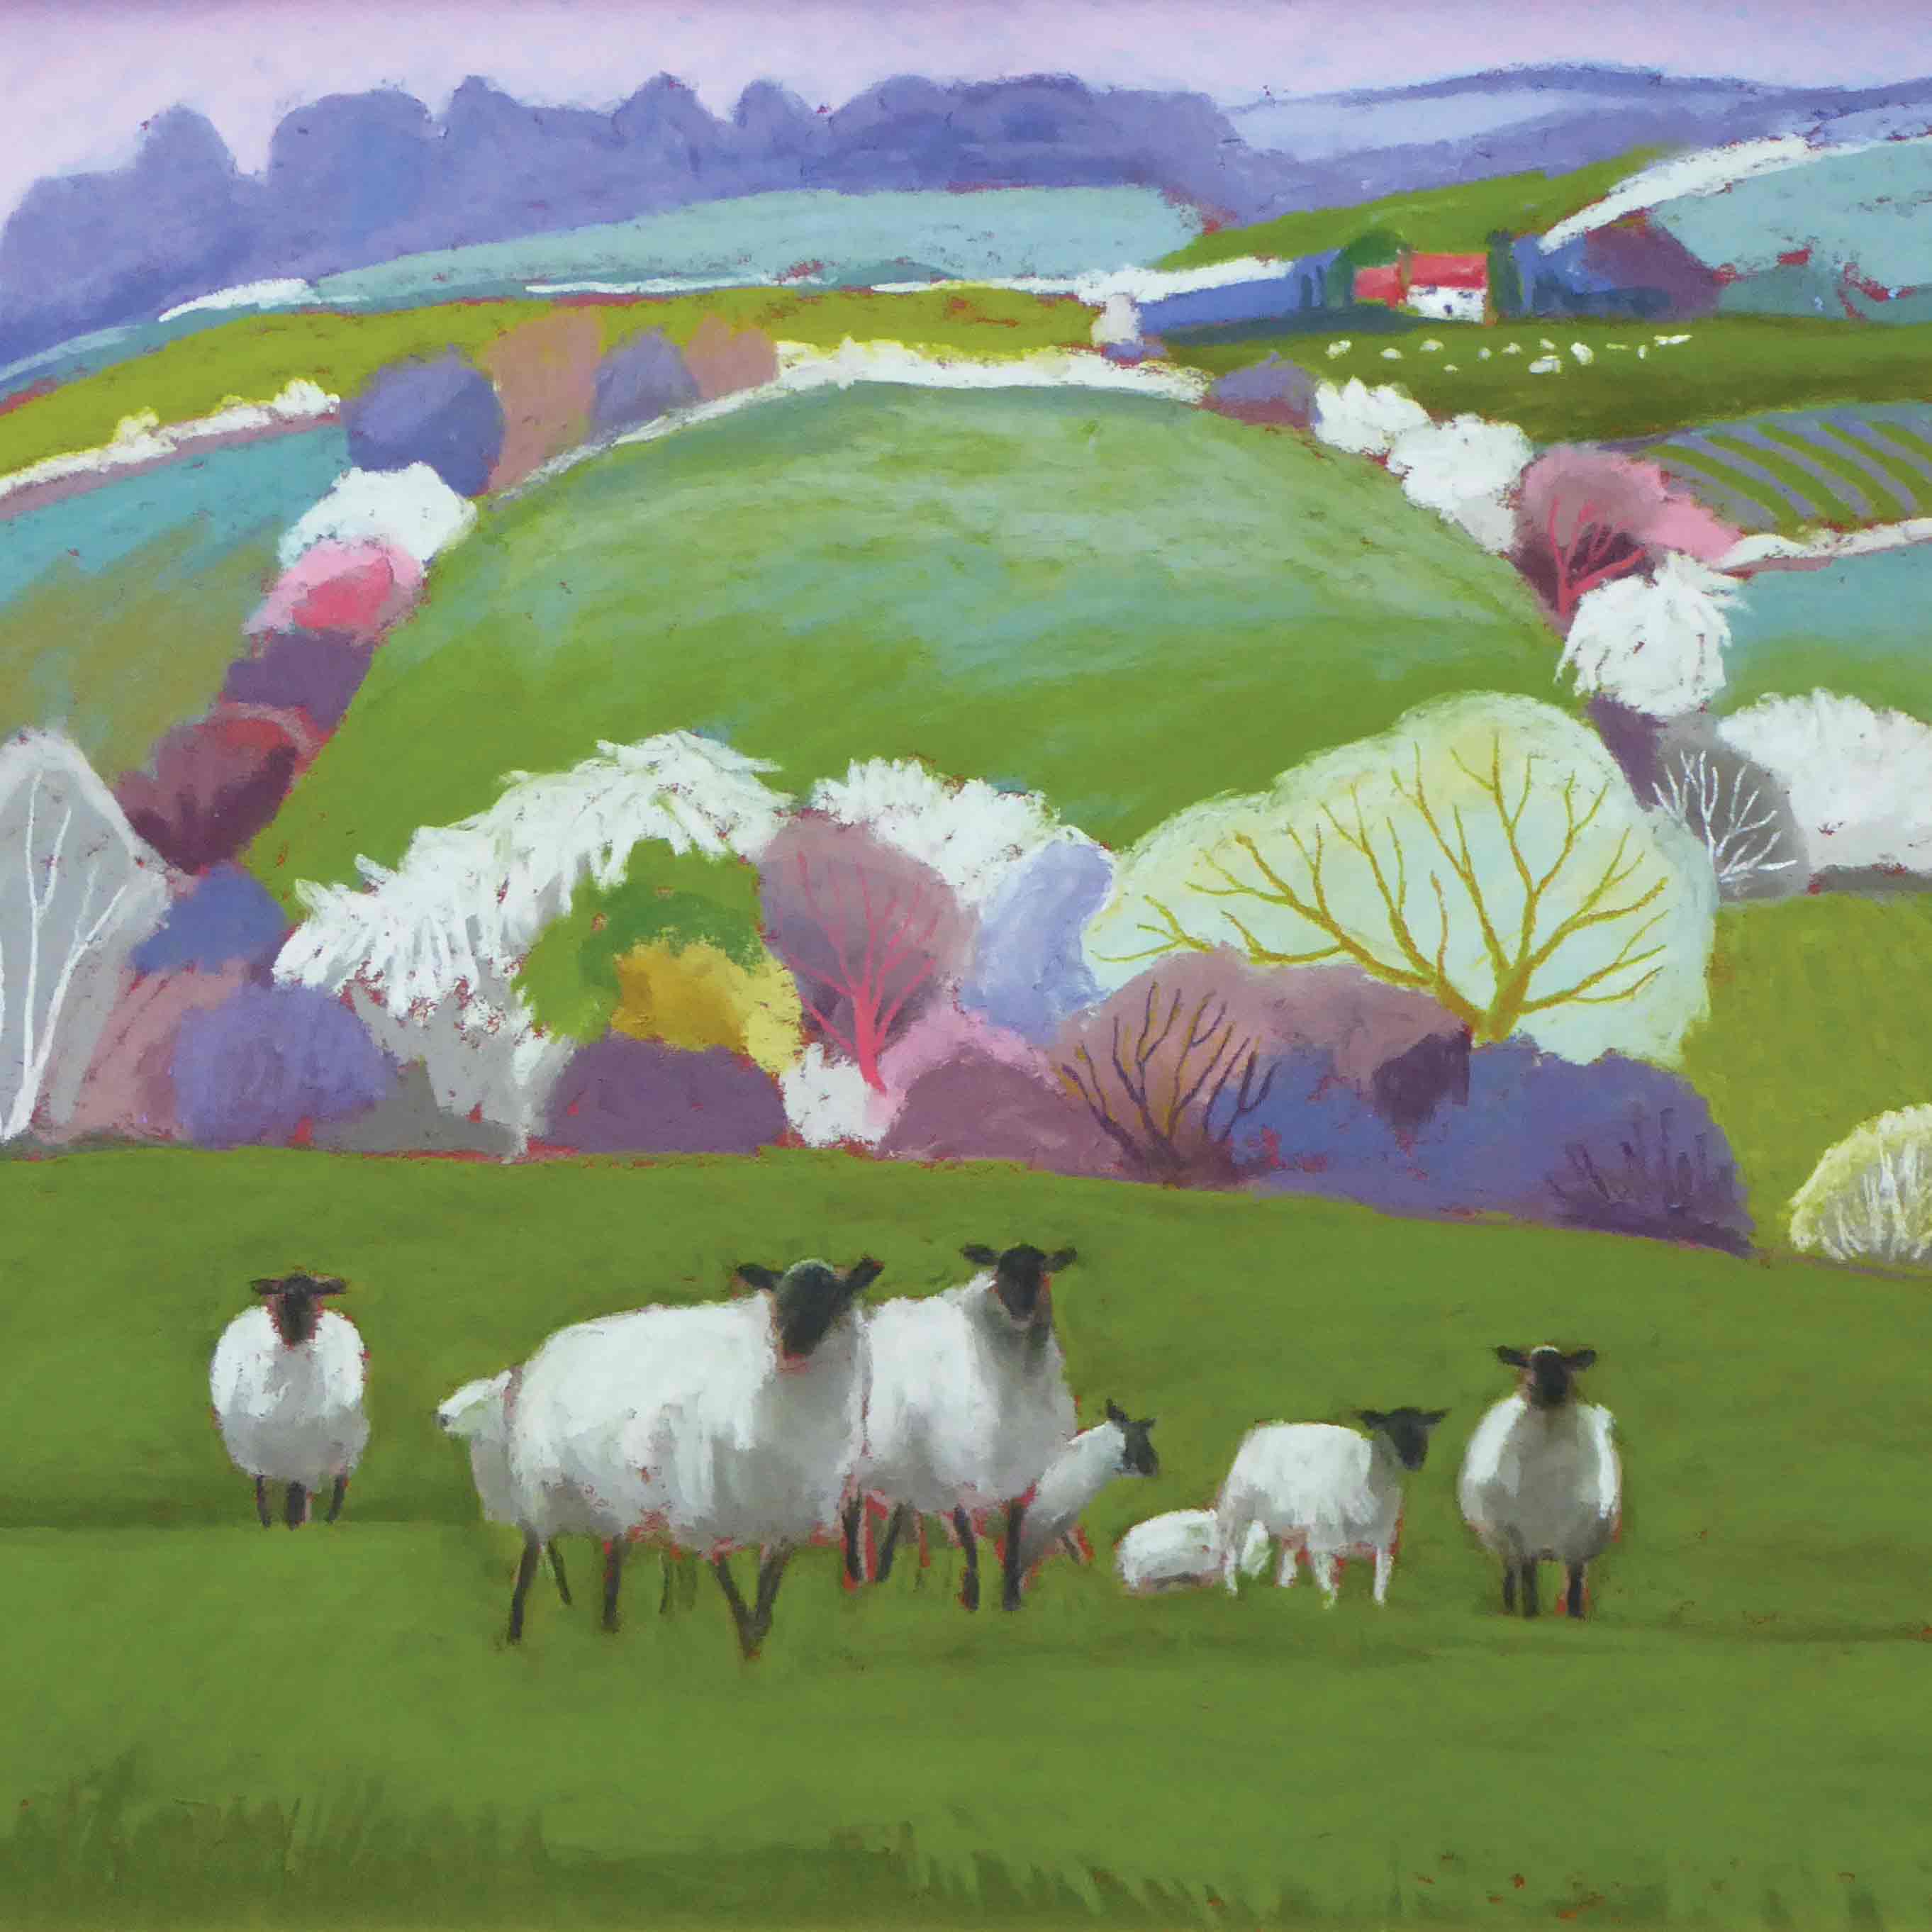 Art Greeting Card by Sue Campion, A Group of Shropshires, Pastel, Summer landscape with sheep